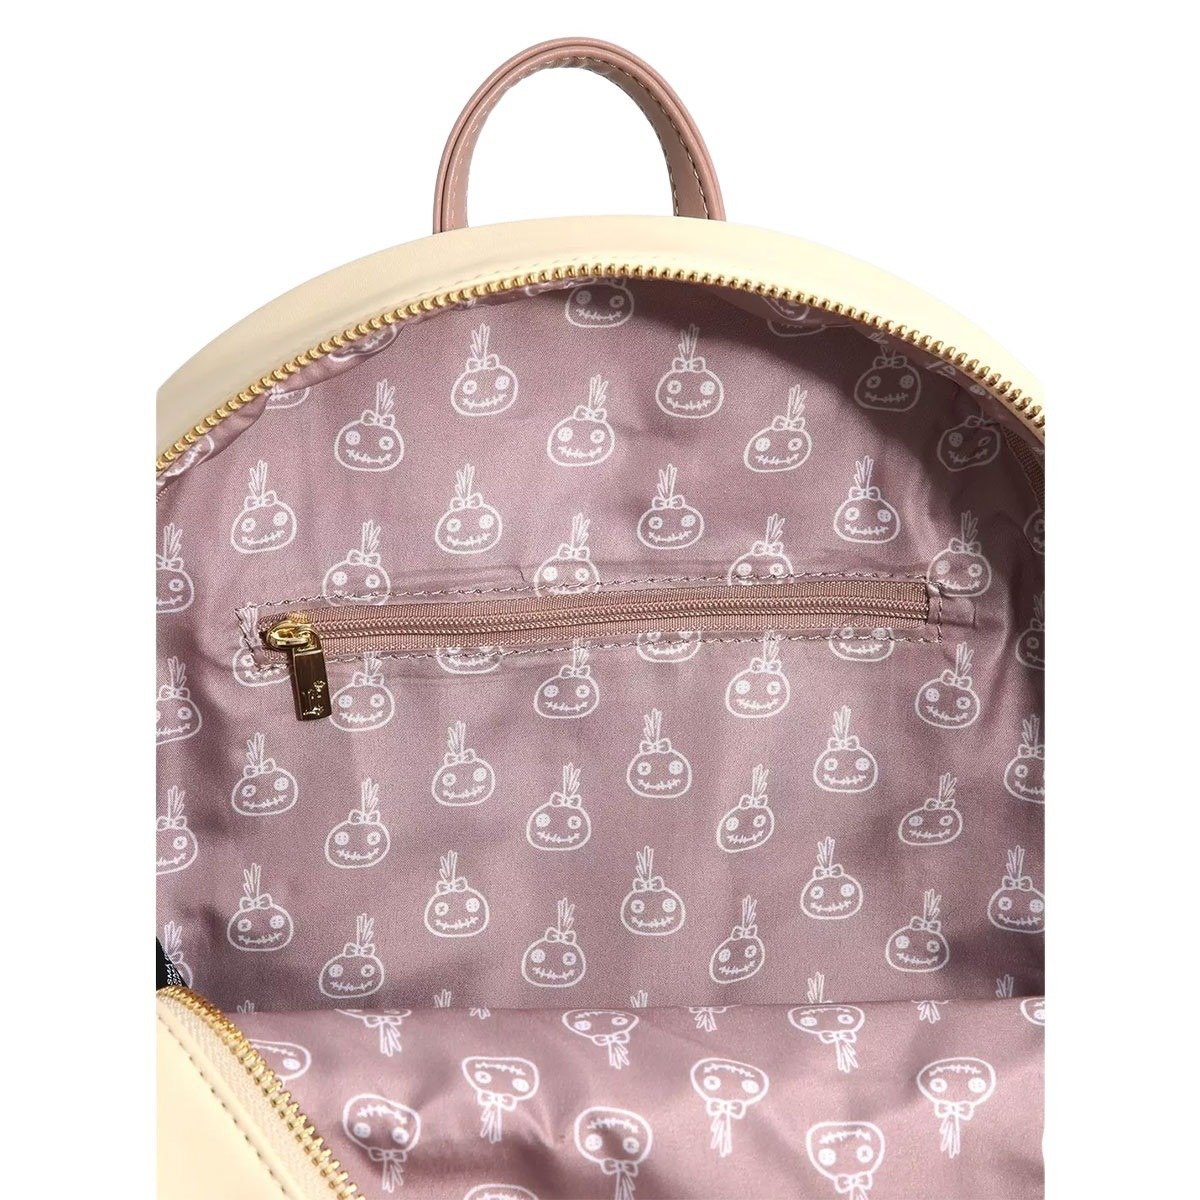 Interior of backpack: Lined with a cute pattern of small, smiling faces.